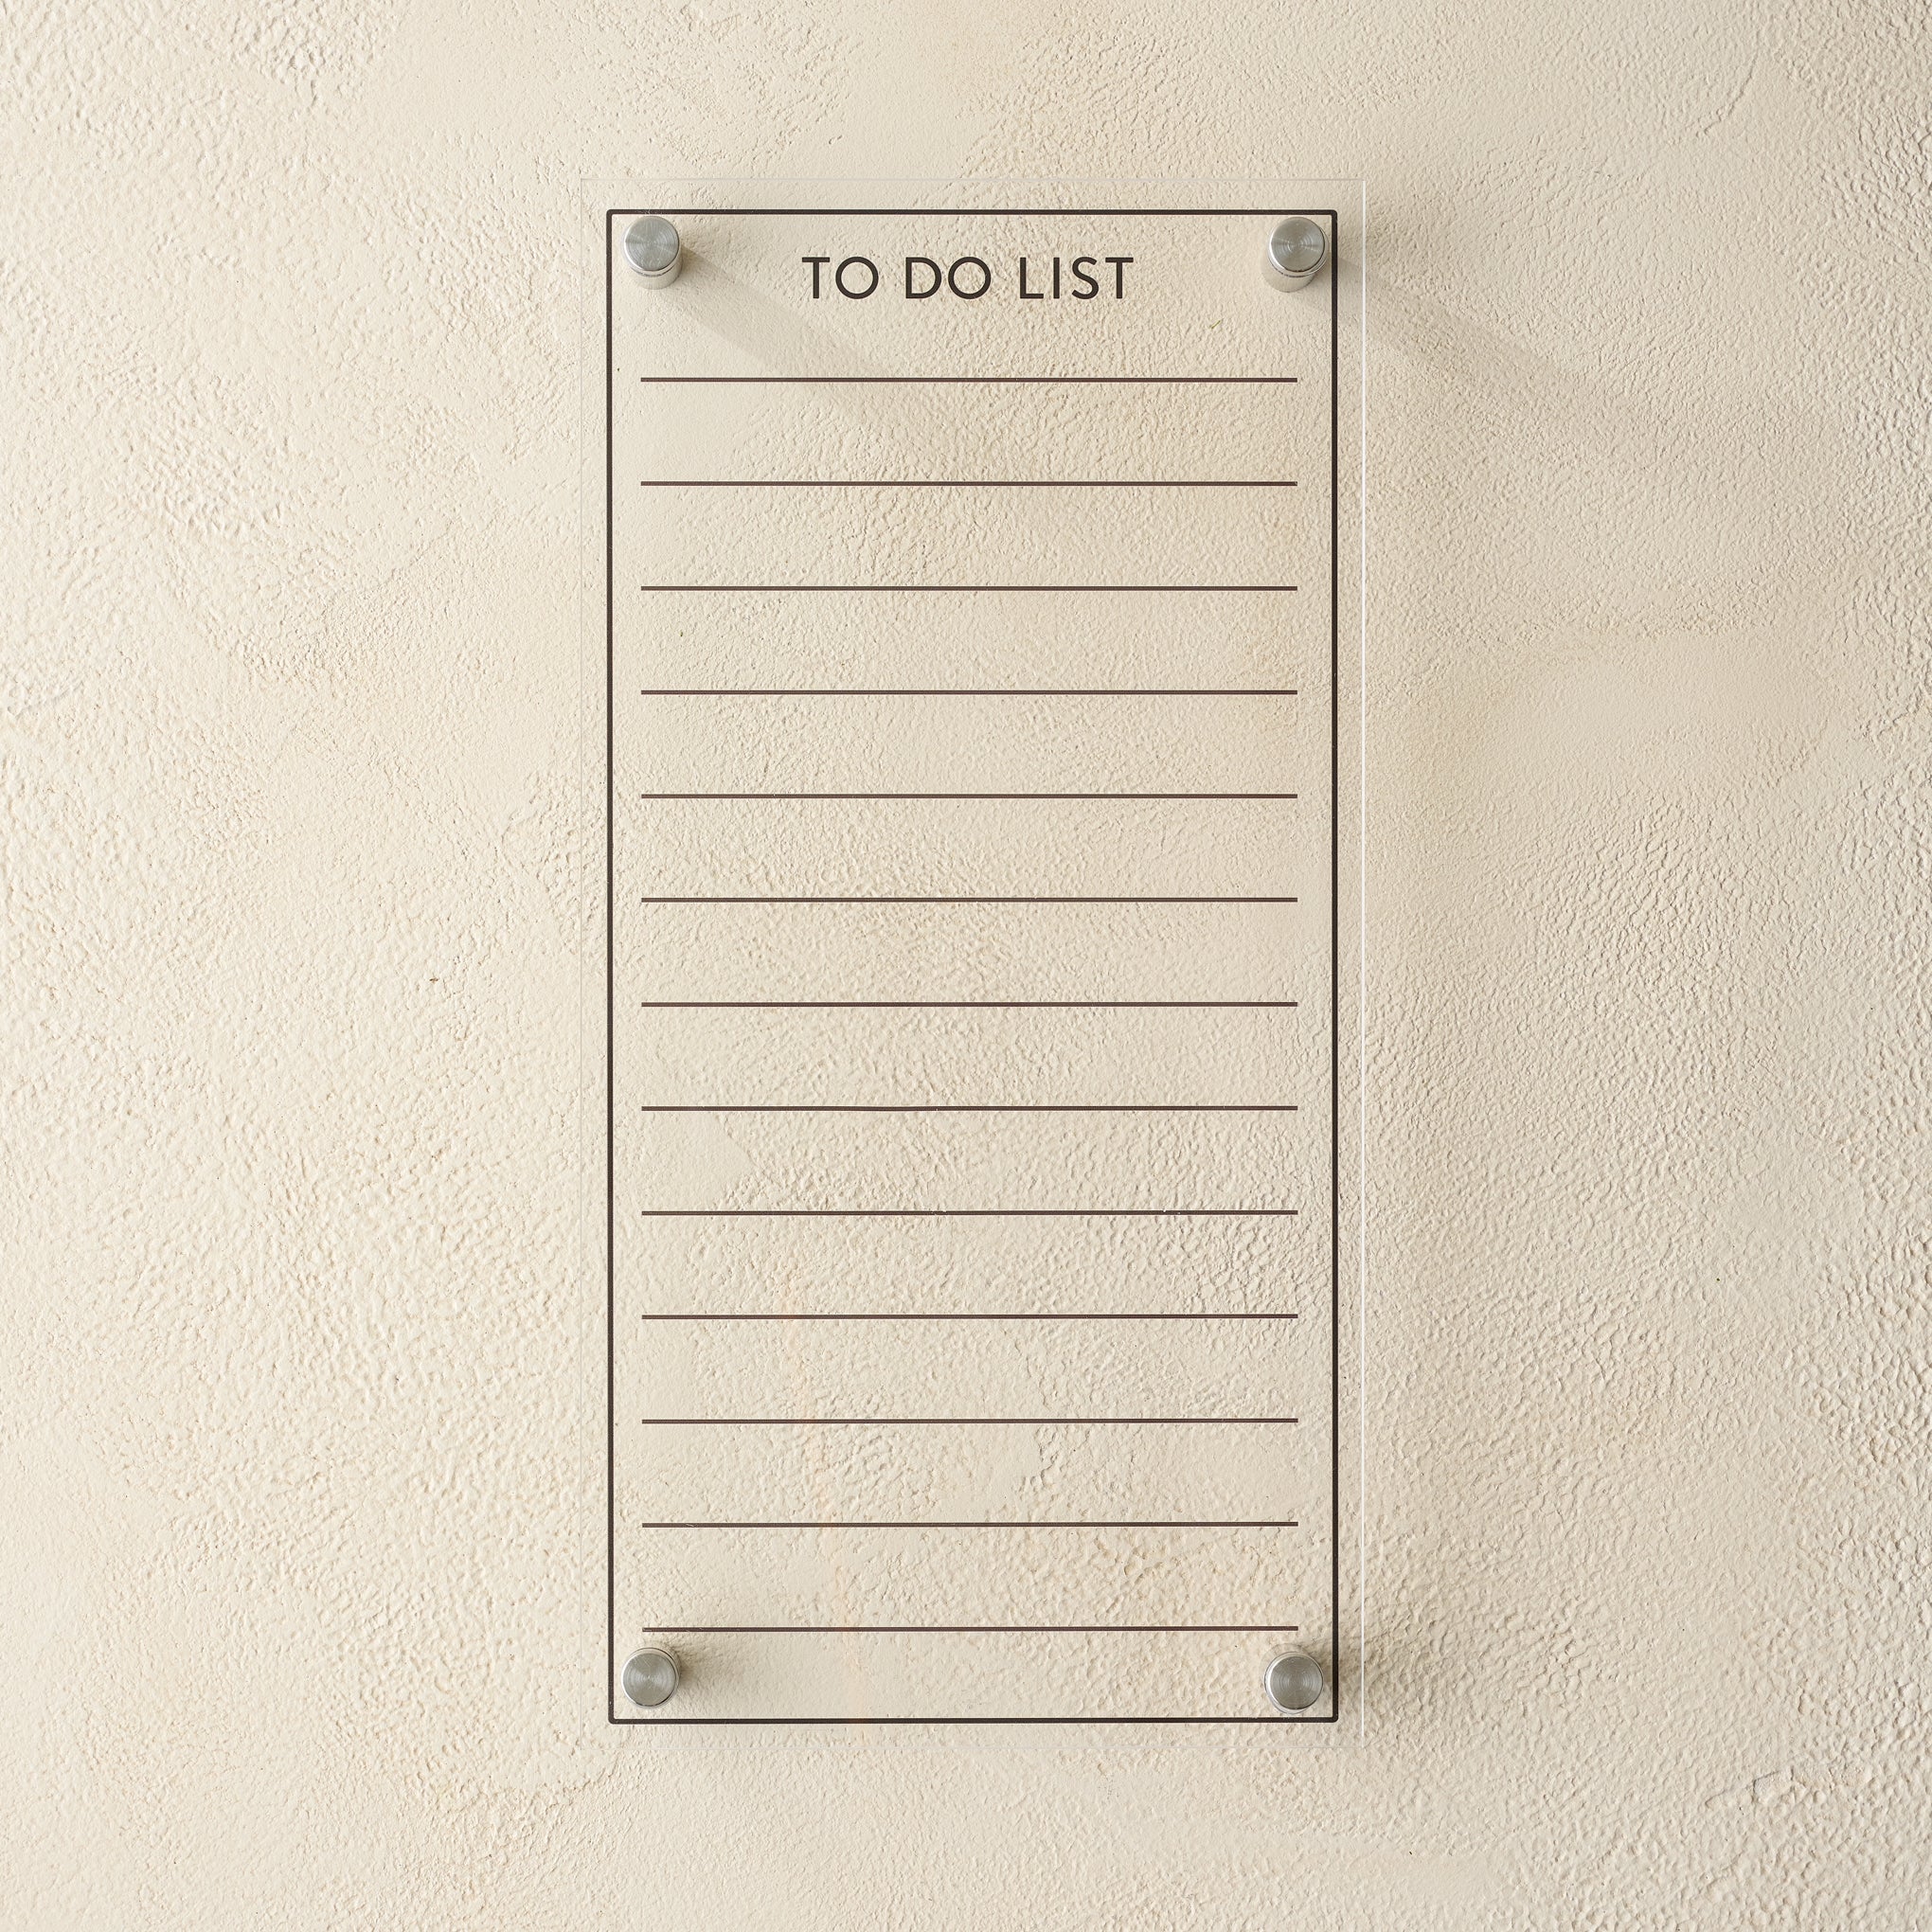 Acrylic To-Do List On sale for $22.40, discounted from $32.00